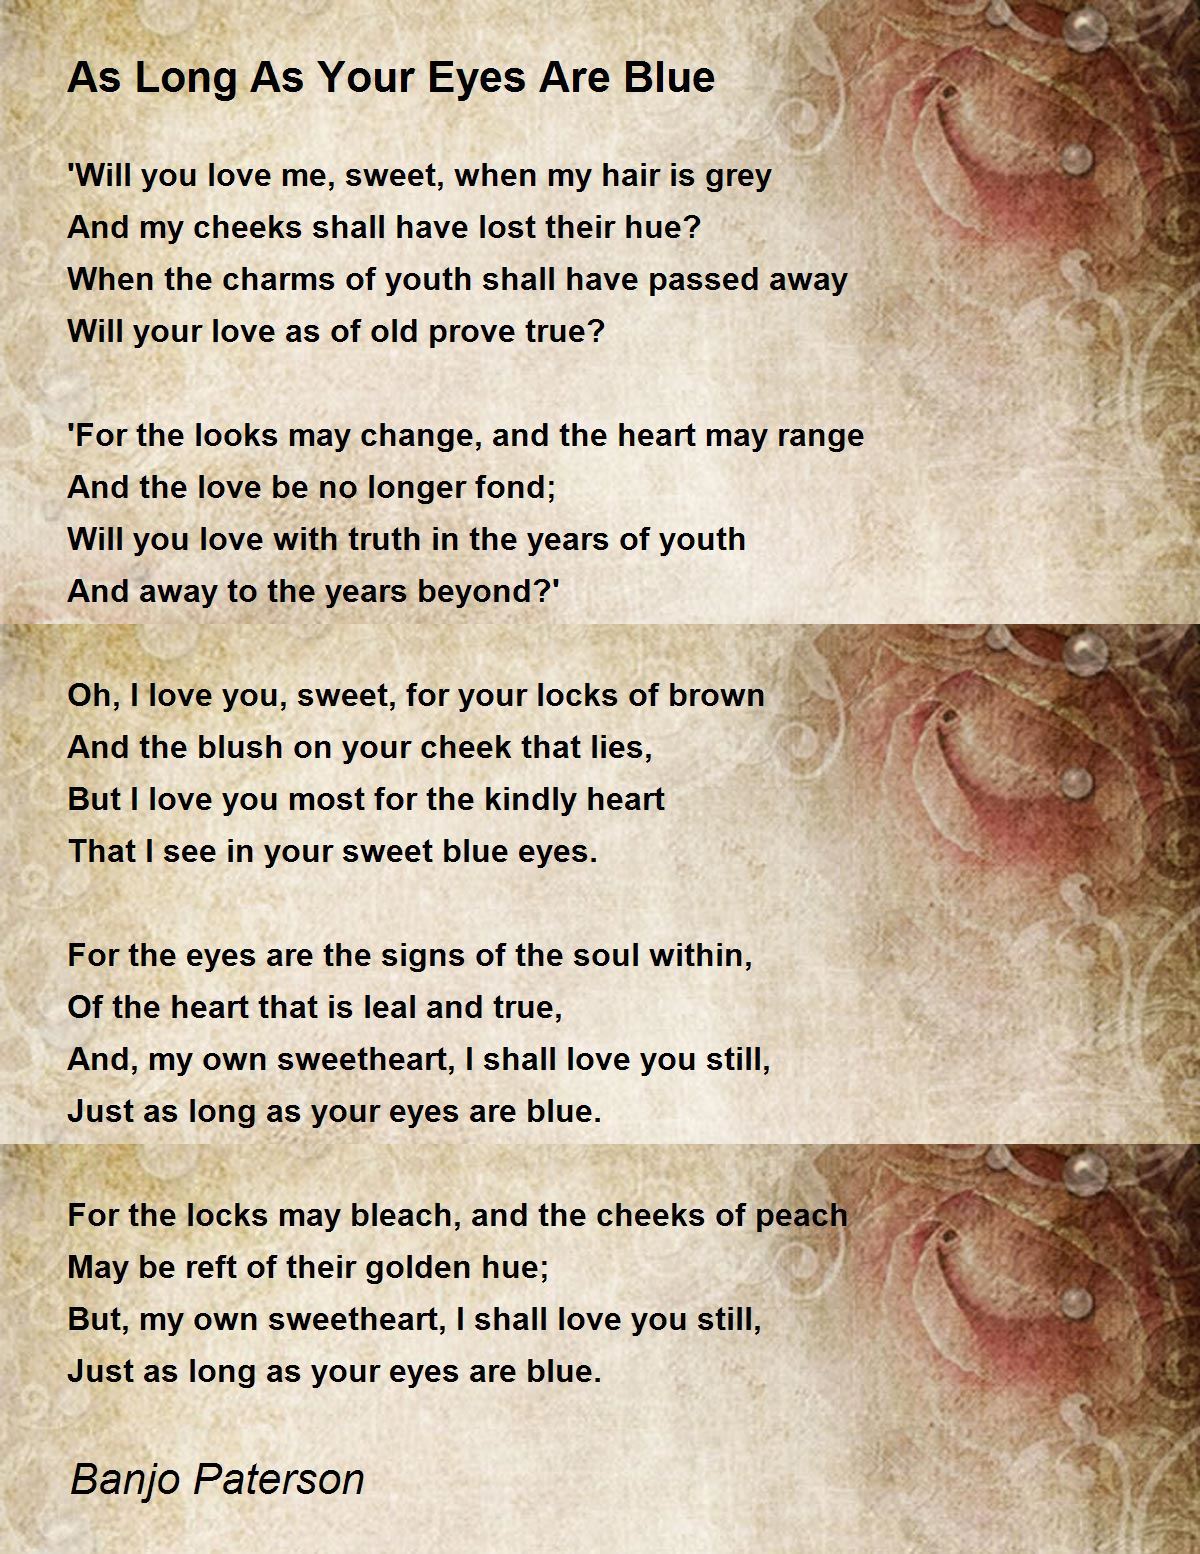 As Long As Your Eyes Are Blue Poem by Banjo Paterson 